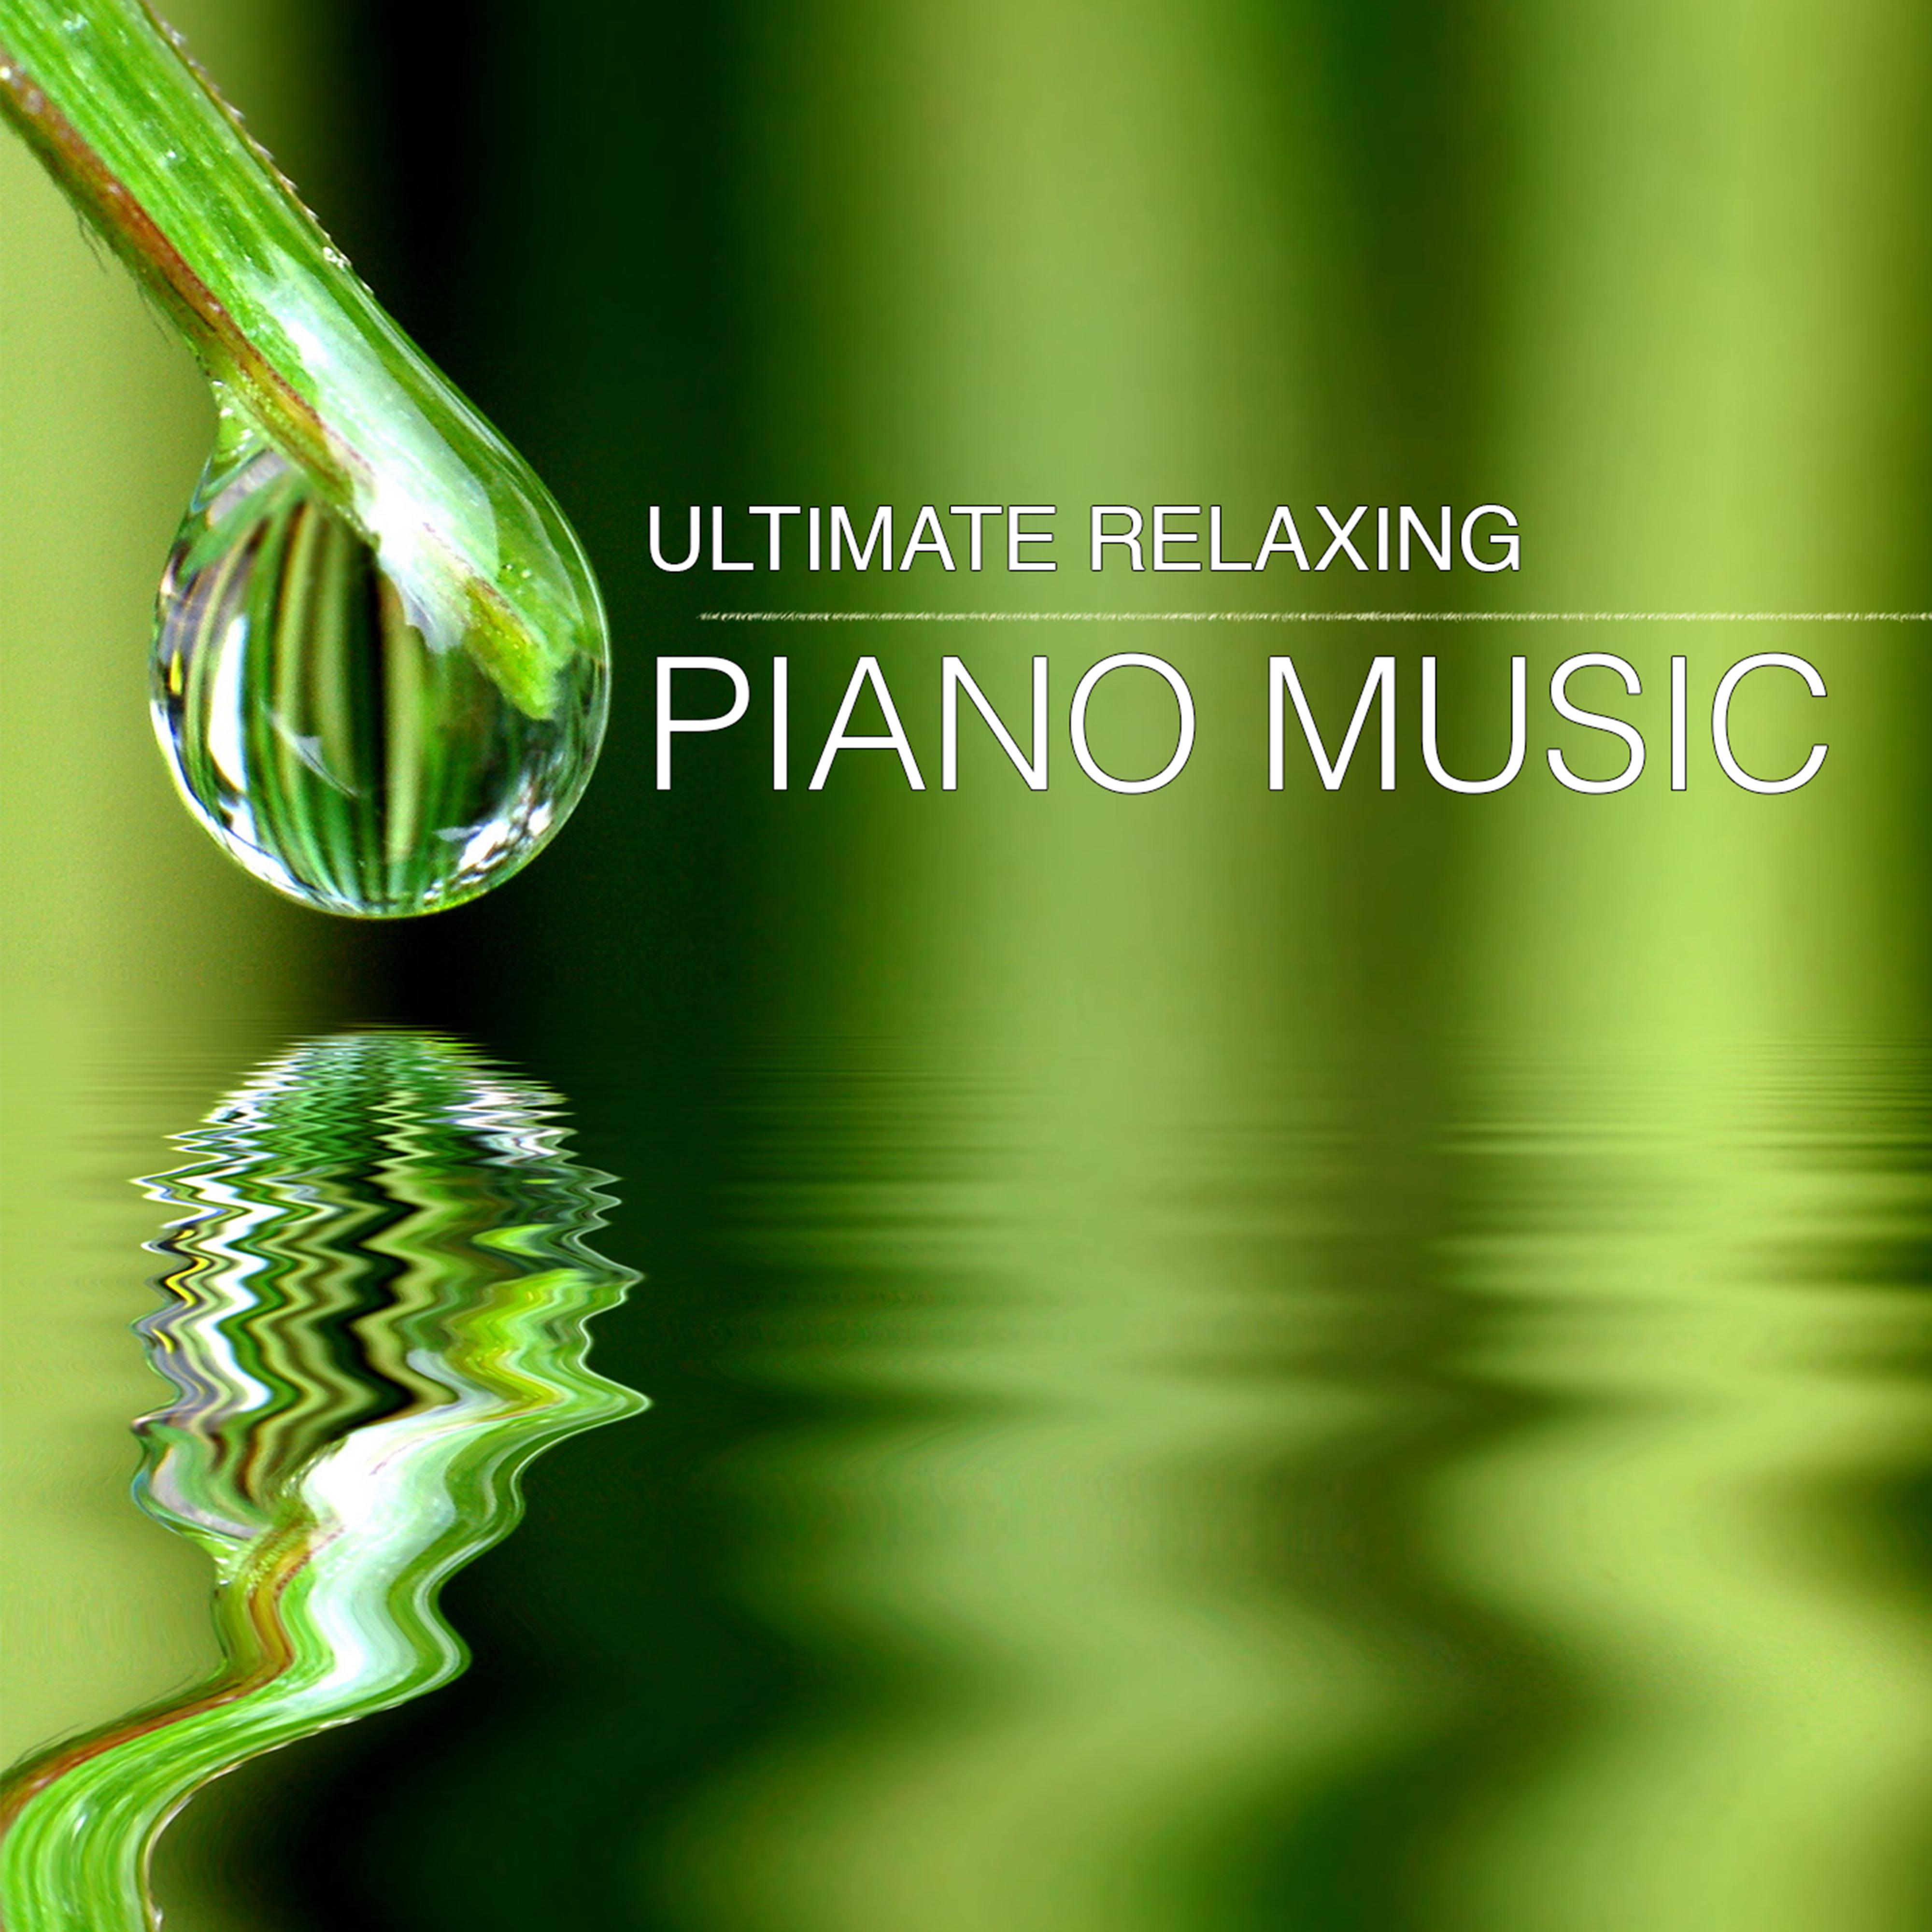 Ultimate Relaxing Piano Music for Wellness, Spa, Massage, Shiatsu, Study, Concentration, Deep Relax, Yoga & Stretching